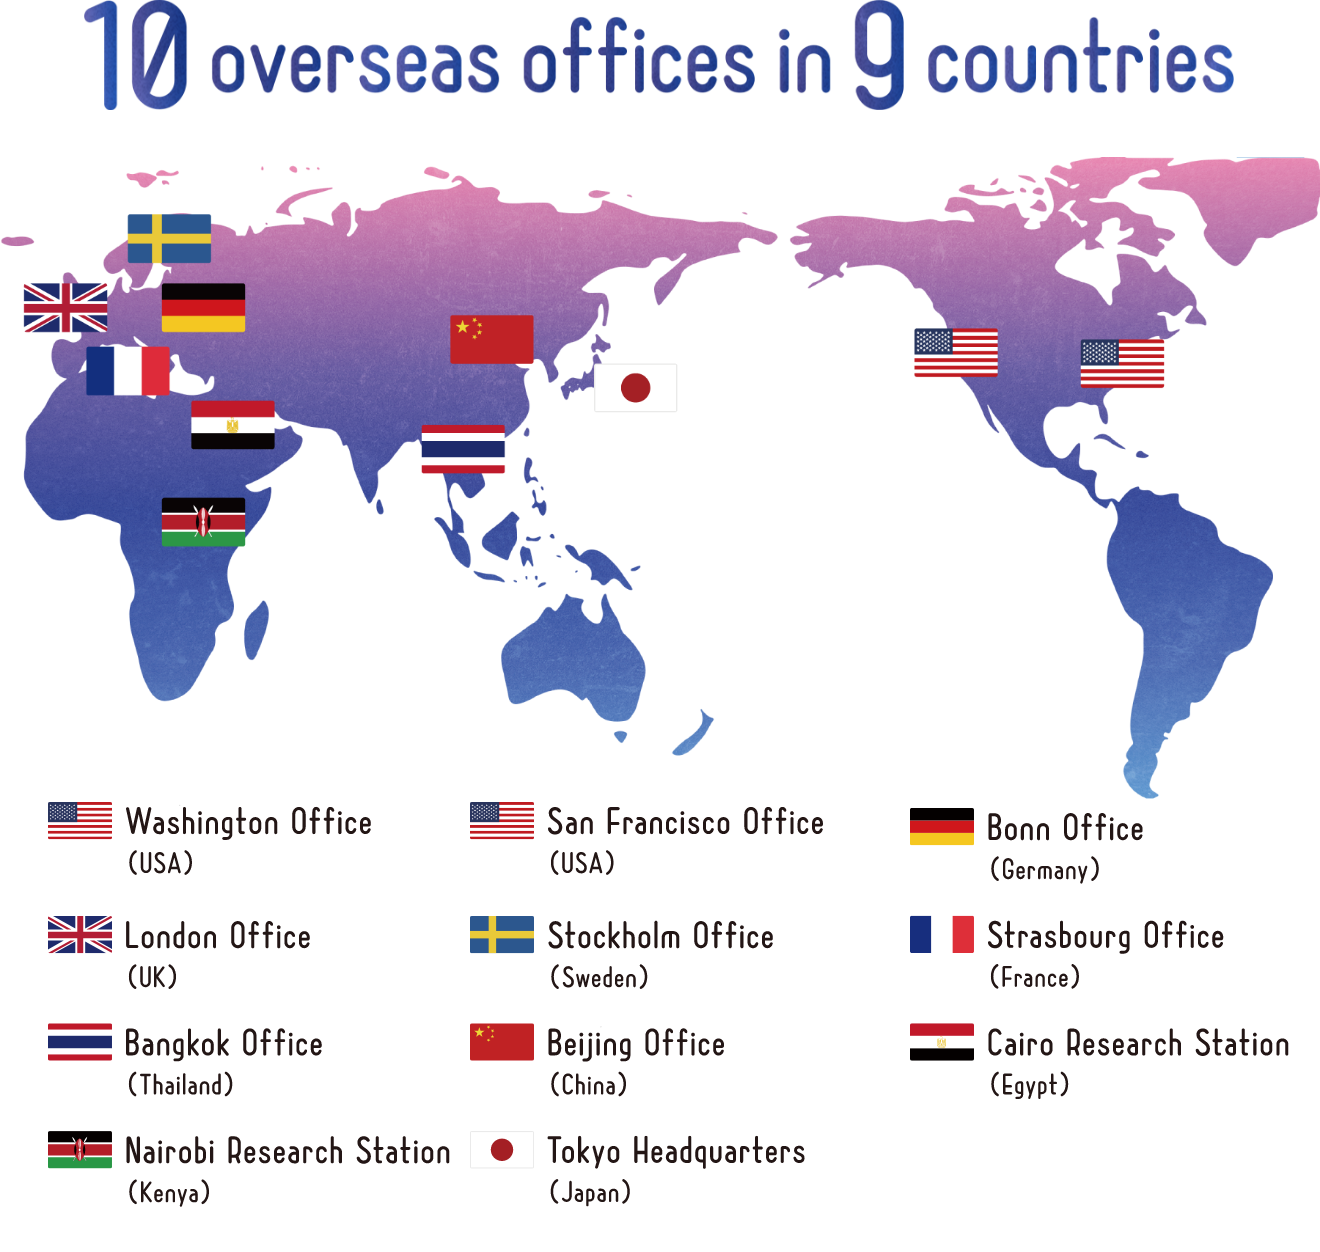 10 overseas offices in 9 countries :Washington  D.C and San Francisco Offices (USA), Bonn Office (Germany), London Office (UK), Stockholm Office (Sweden), Strasbourg Office (France), Bangkok Office (Thailand), Beijing Office (China), Cairo Research Station (Egypt), Nairobi Research Station (Kenya), Tokyo Headquarters (Japan)